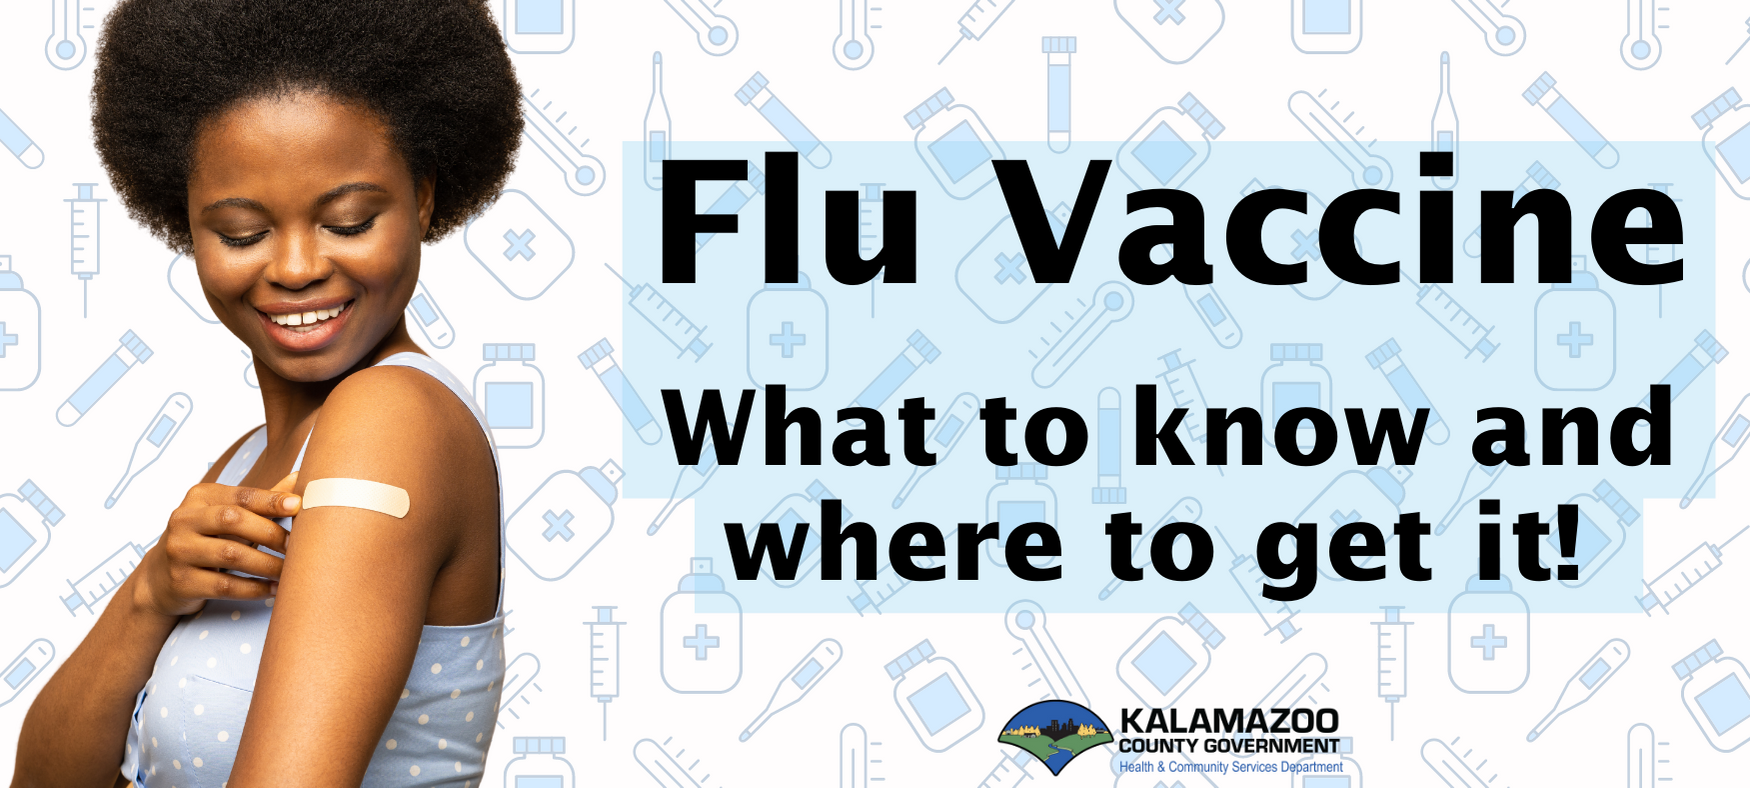 Flu vaccine appointments are available at Kalamazoo County Health and Community Services Department.